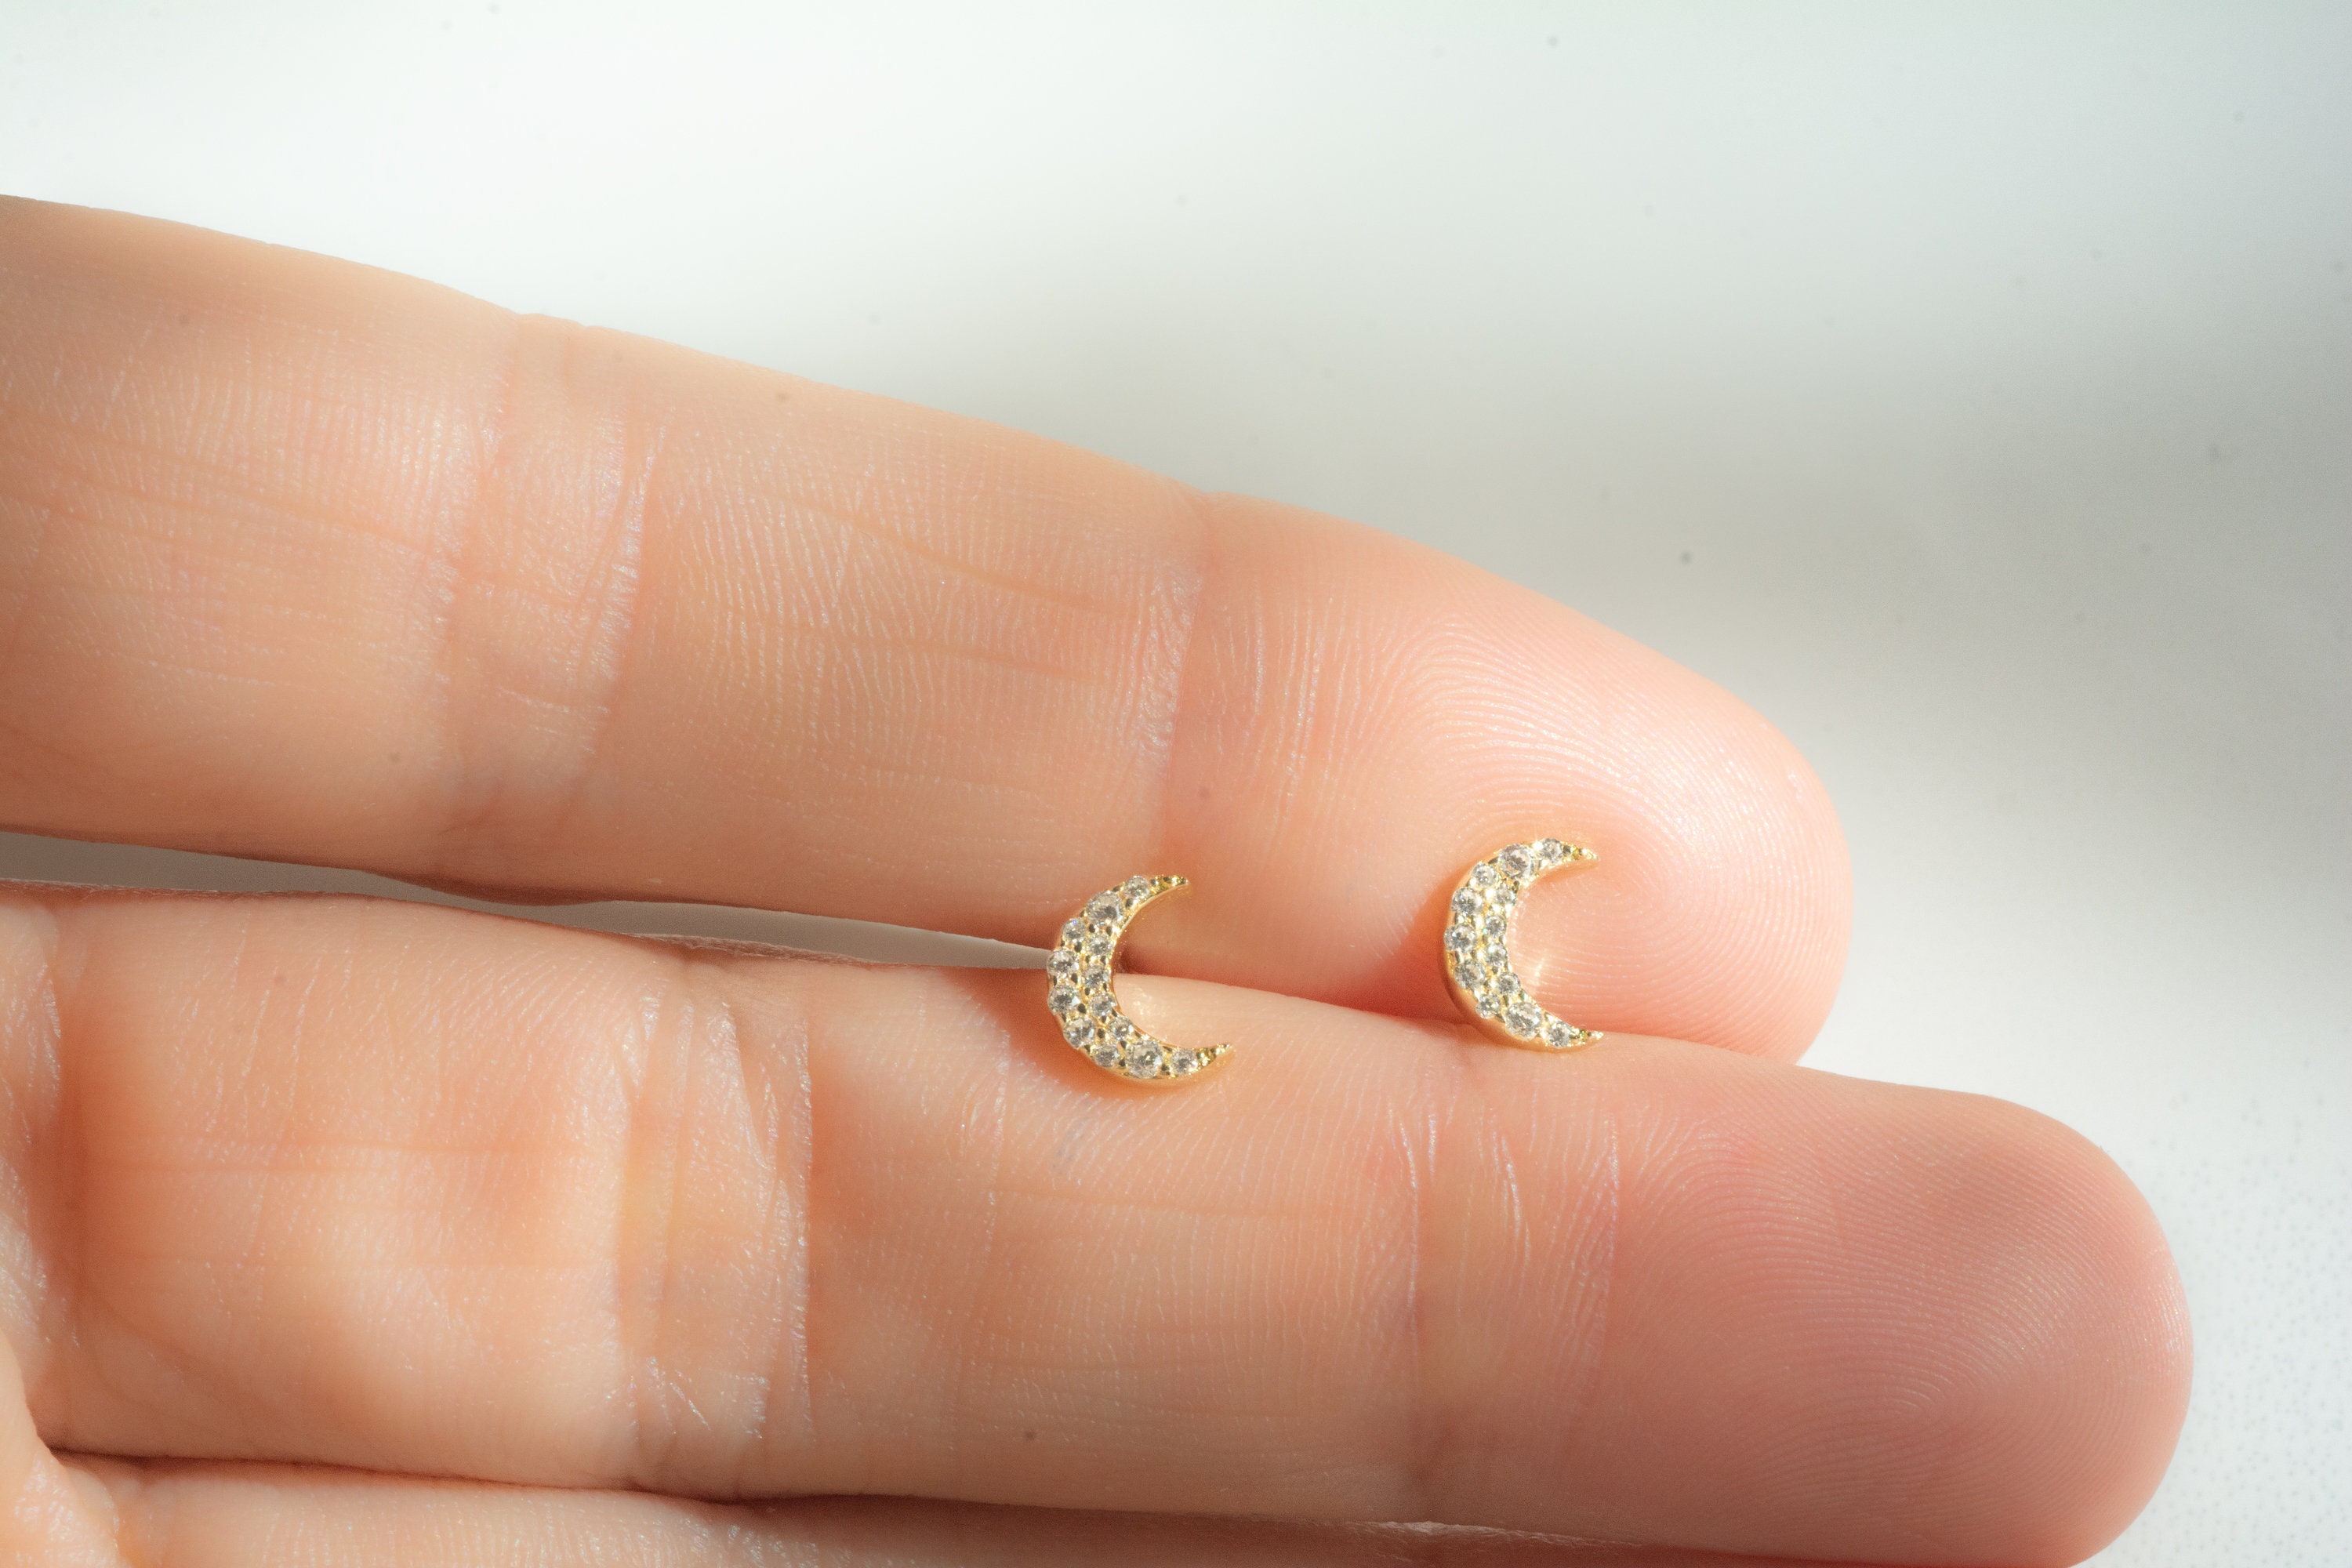 Buy Second Hole Earrings Online In India - Etsy India